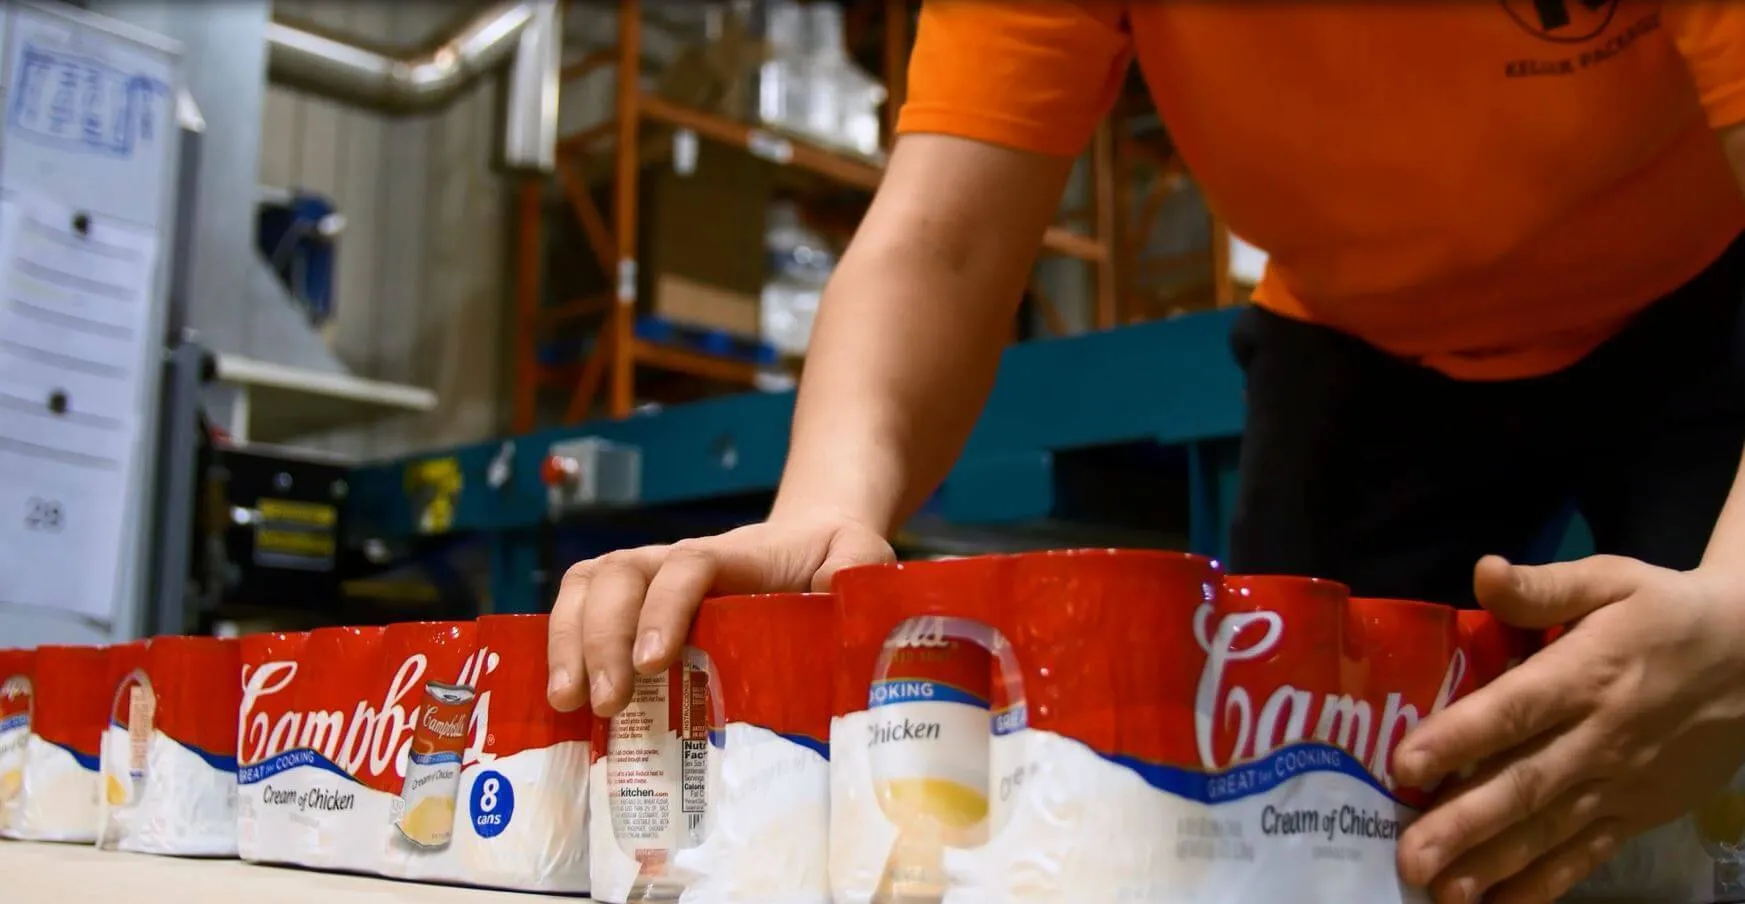 Several 8-packs of Campbell's cream of chicken soup in packaging being handled